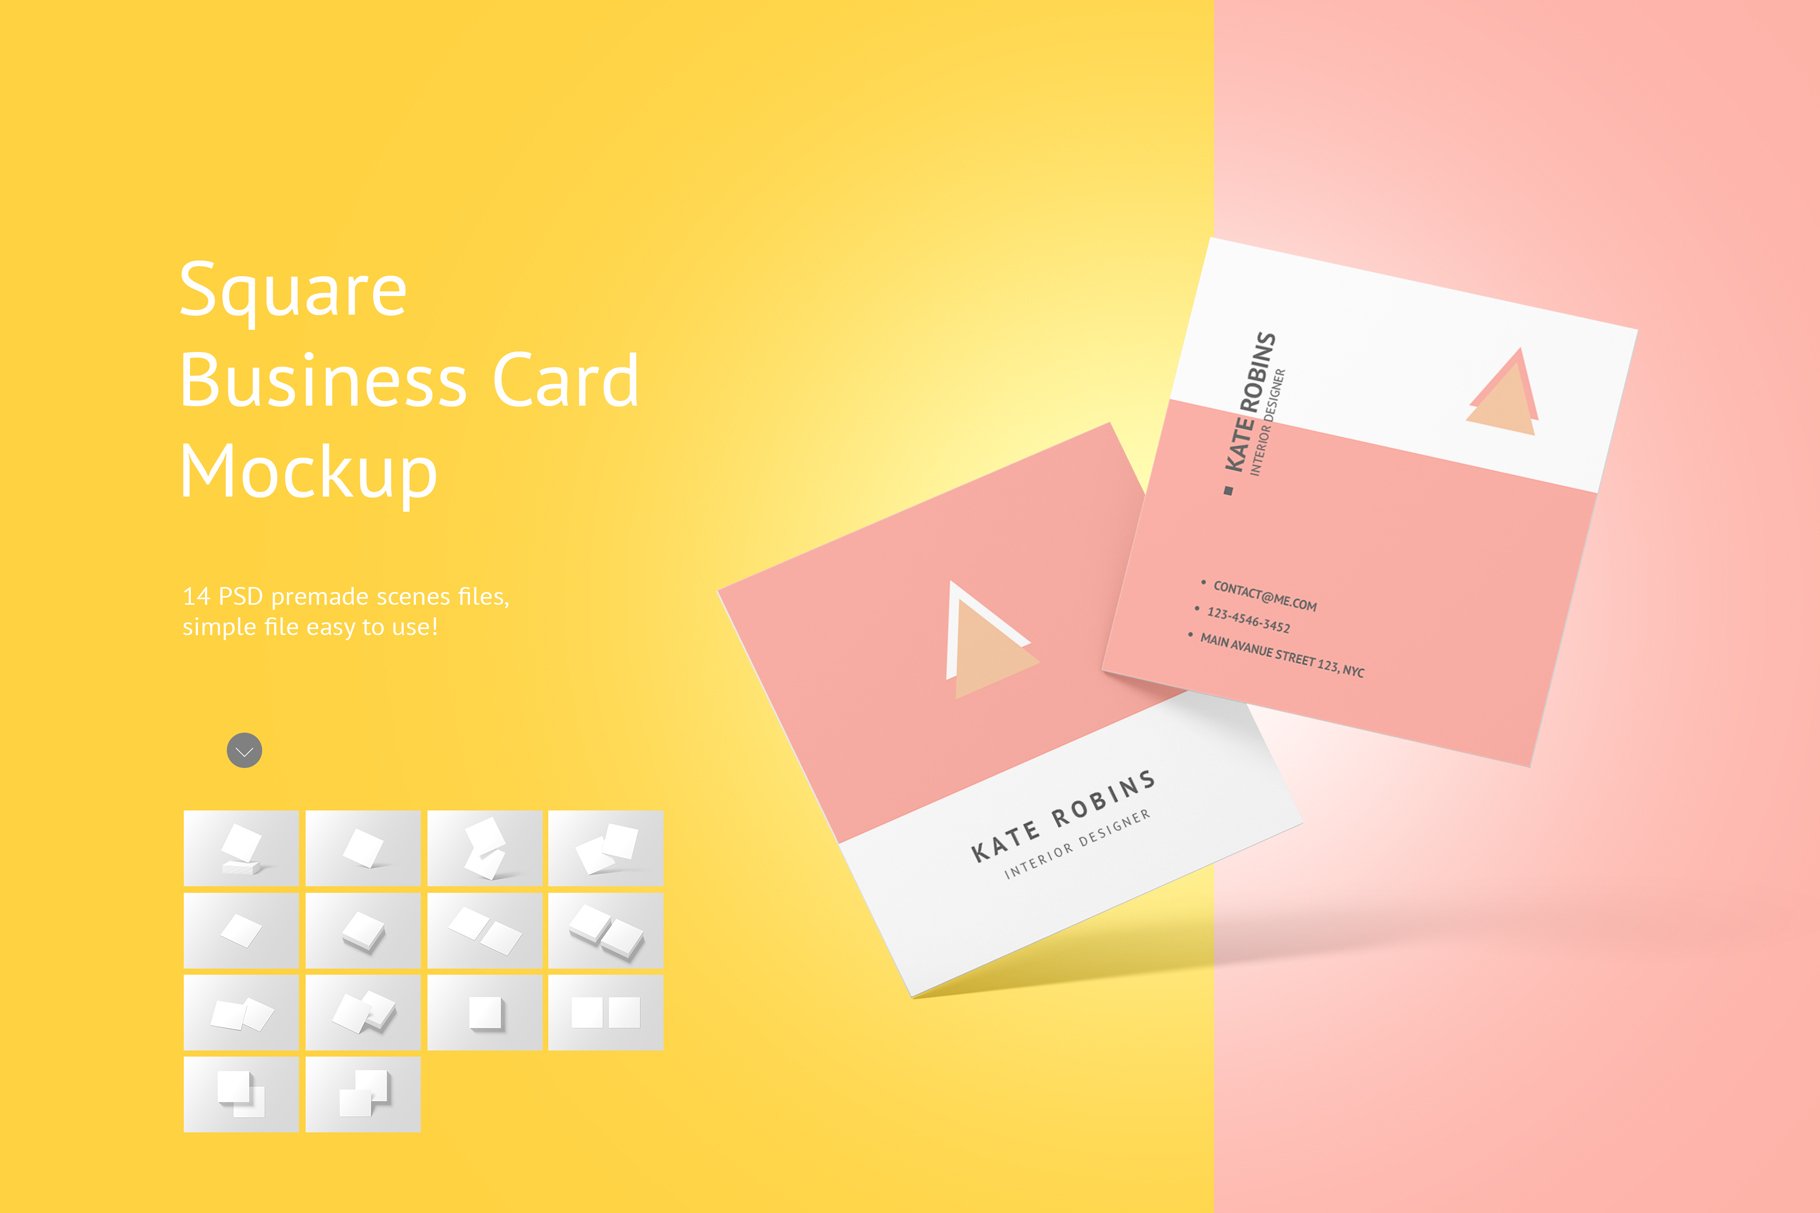 Square Business Card Mockup cover image.